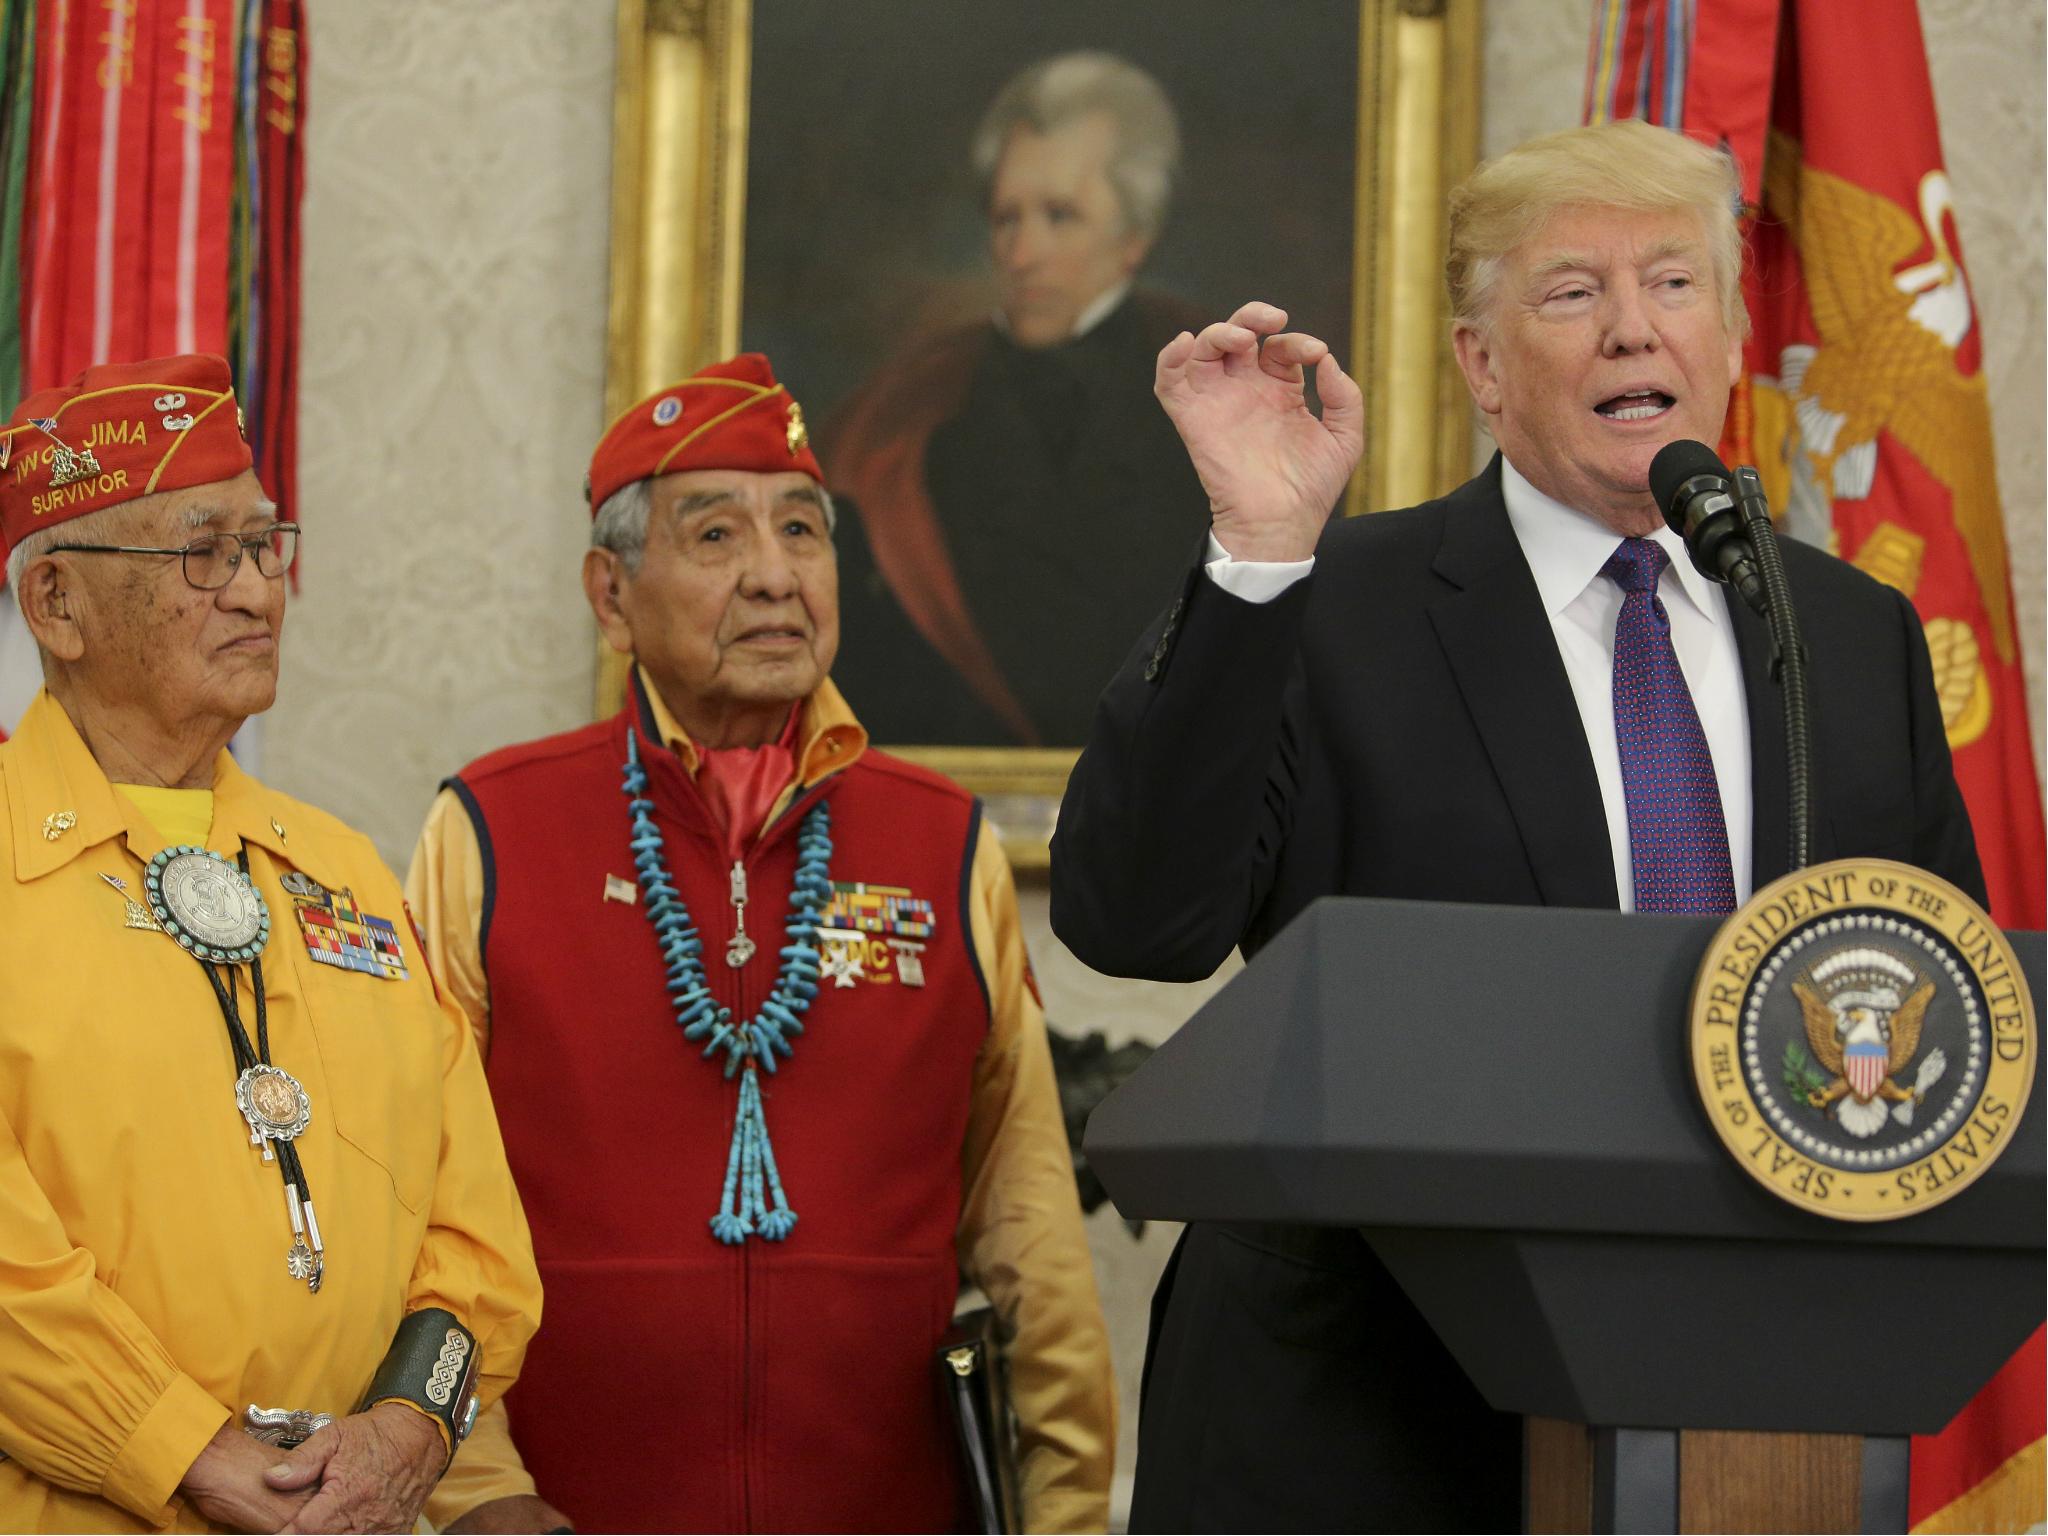 The President used a racial slur in front of Navajo code talkers at the White House